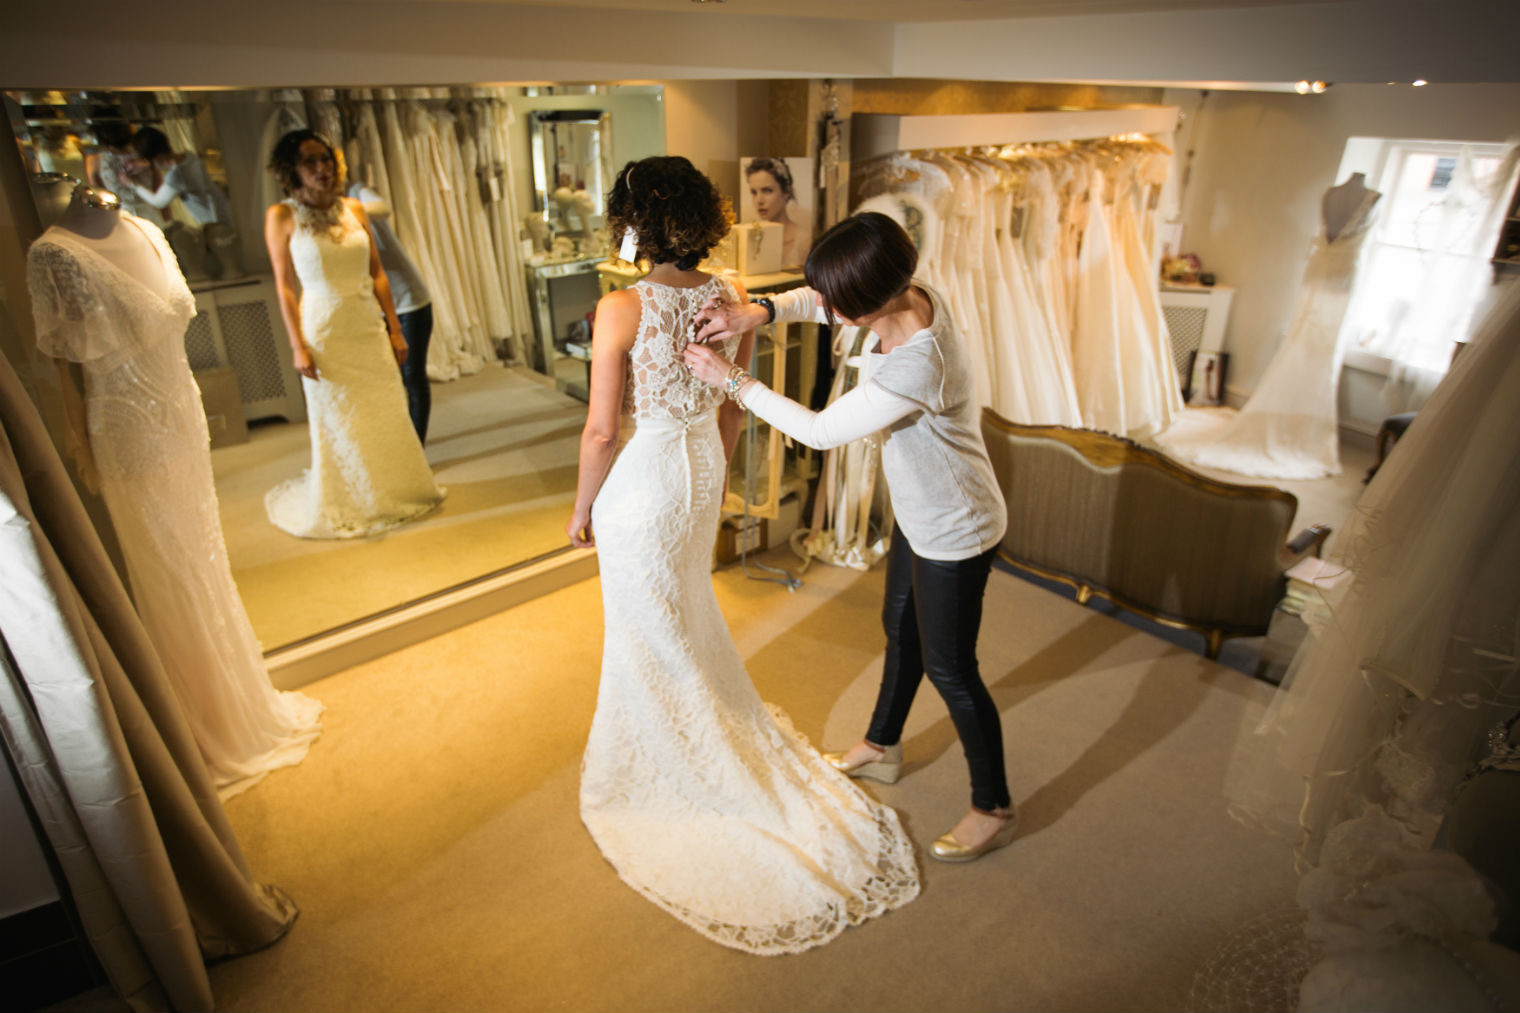 Sally White owner of White Bride bridal boutique in West Wales